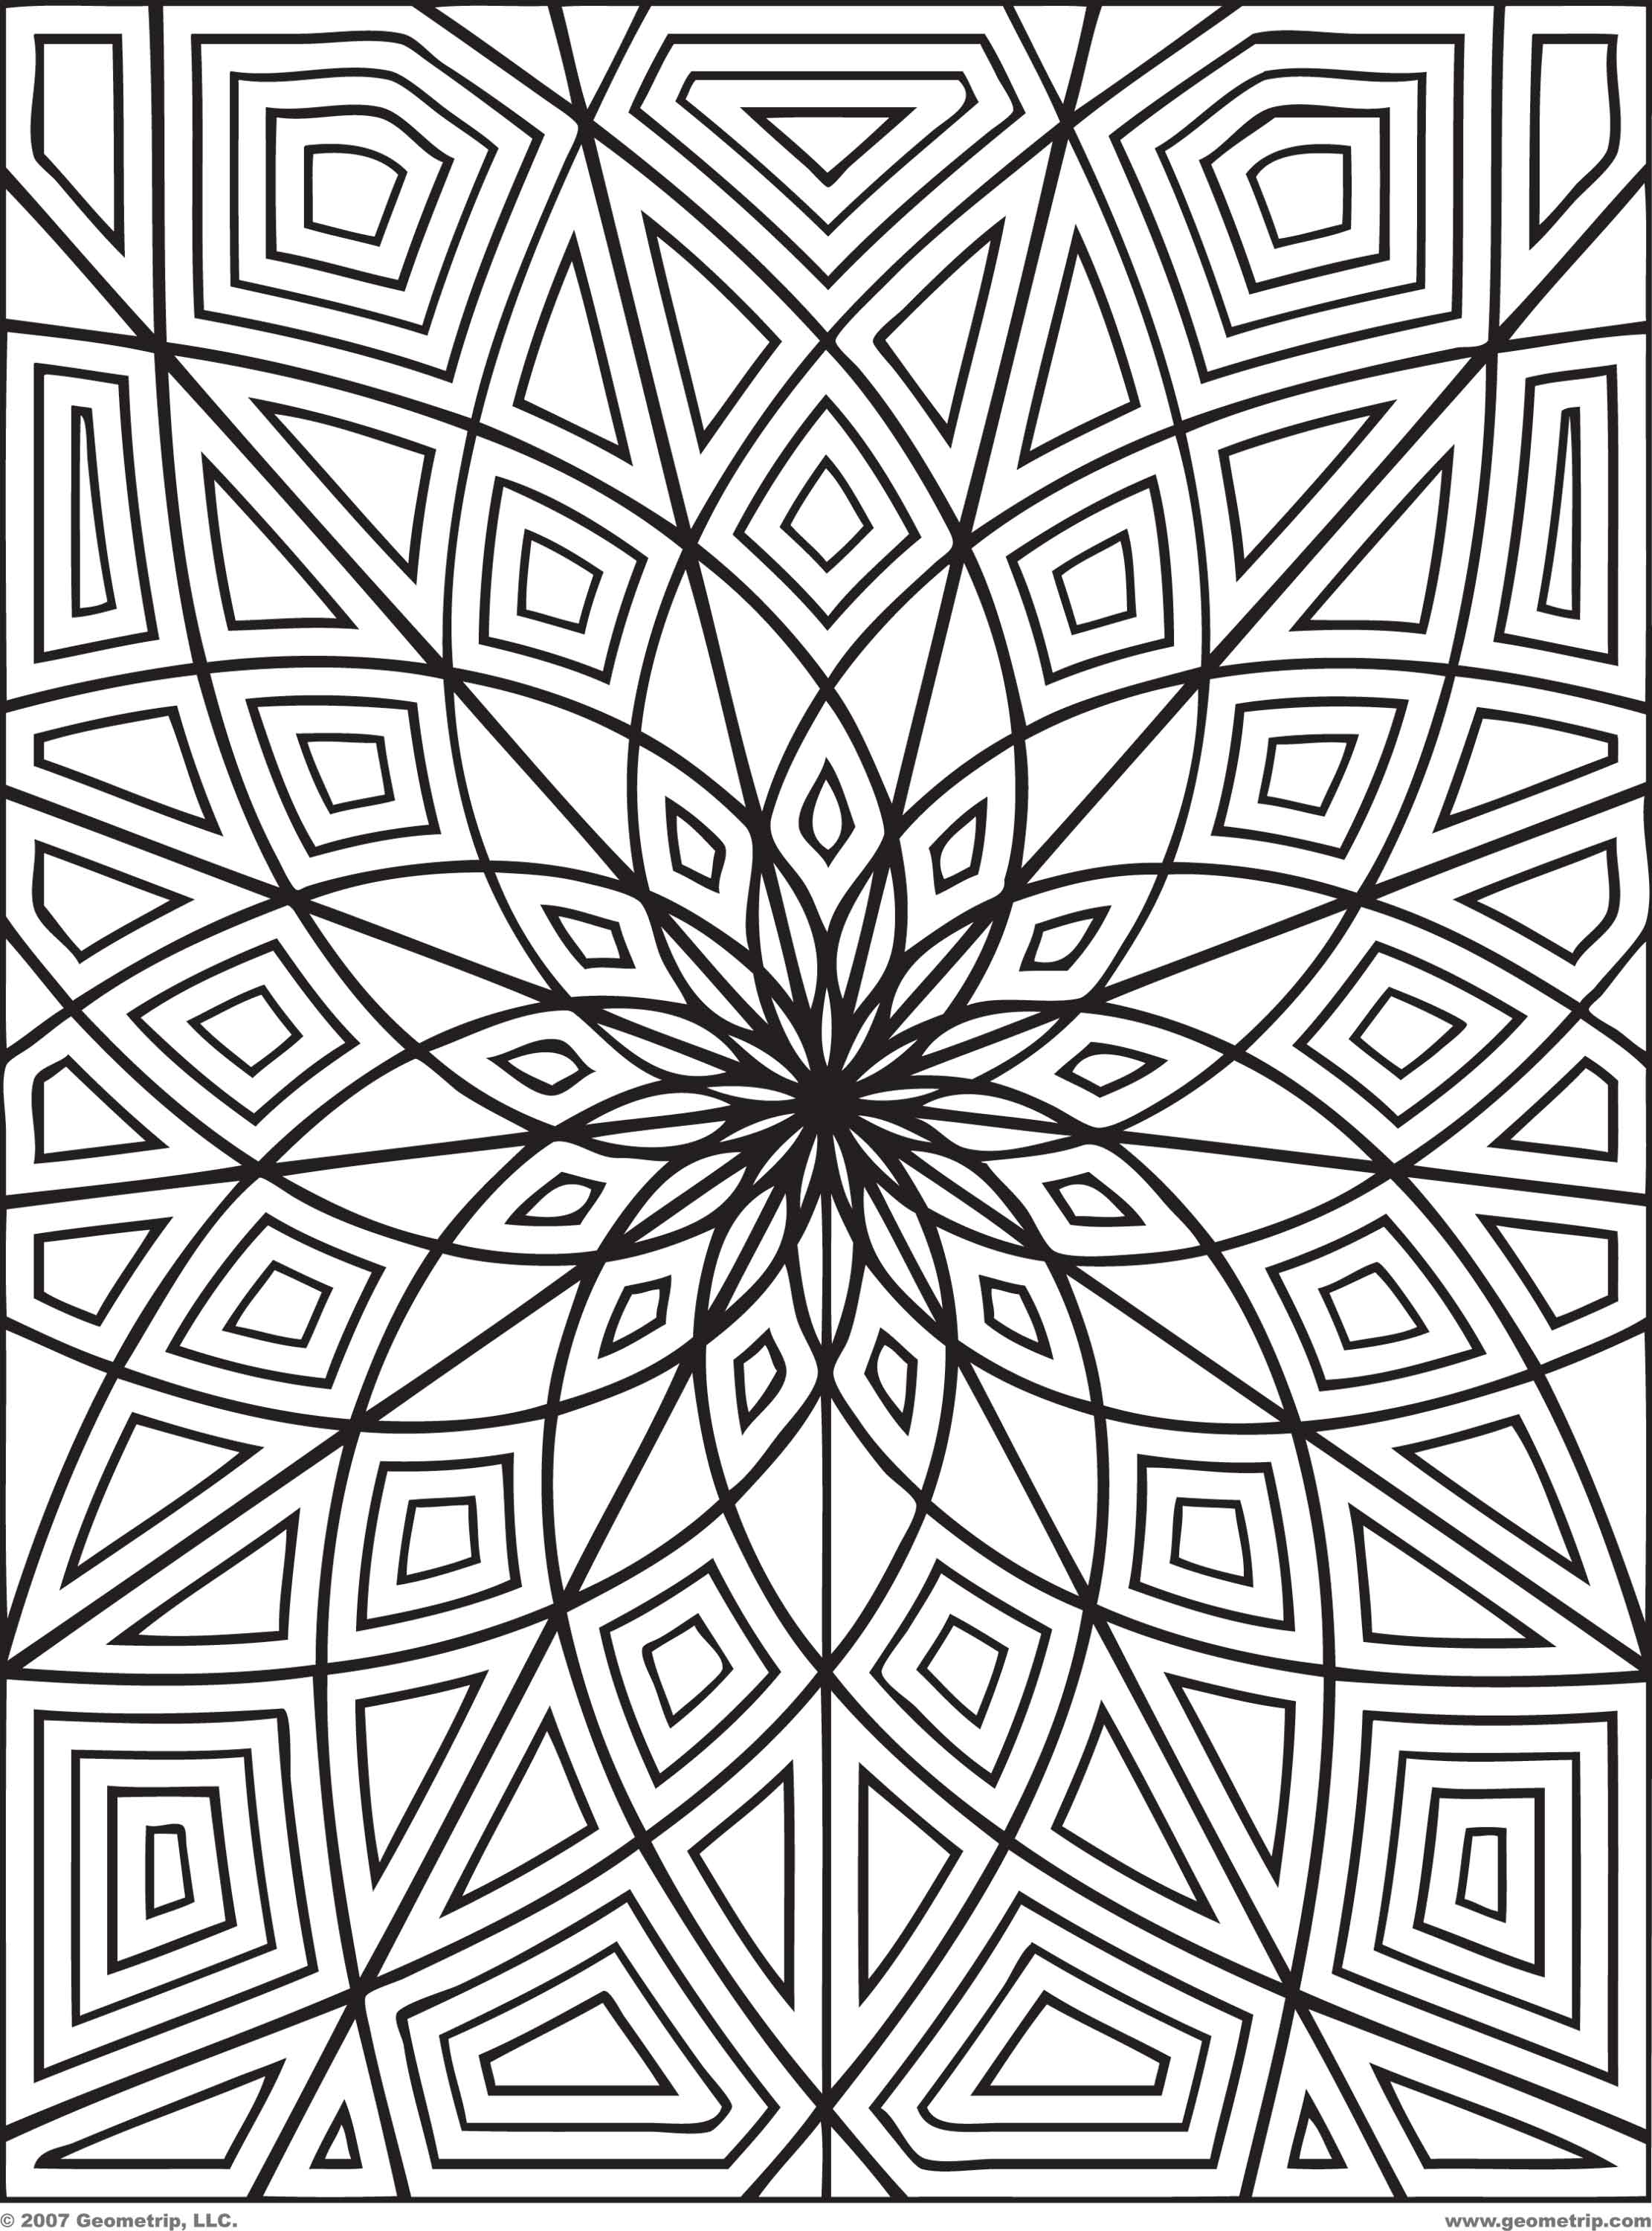 Adult Coloring Pages | sidstudies.com